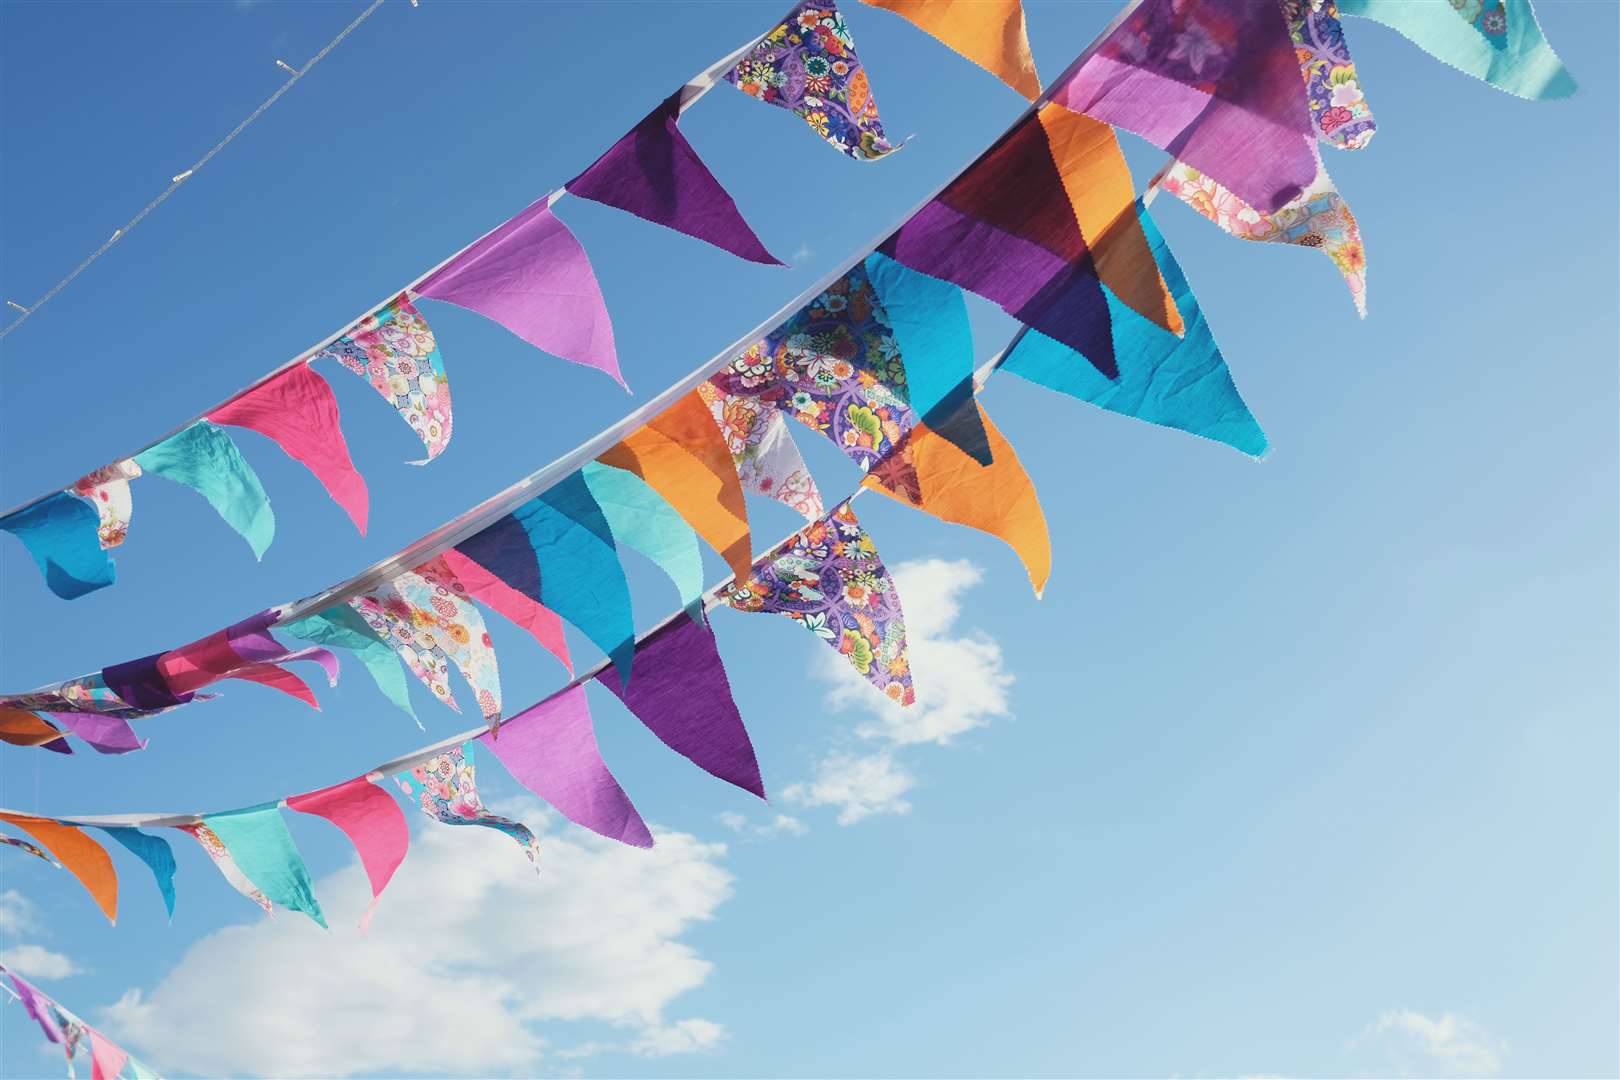 The bunting is out and residents in the Kyle of Sutherland area are ready to enjoy themselves.